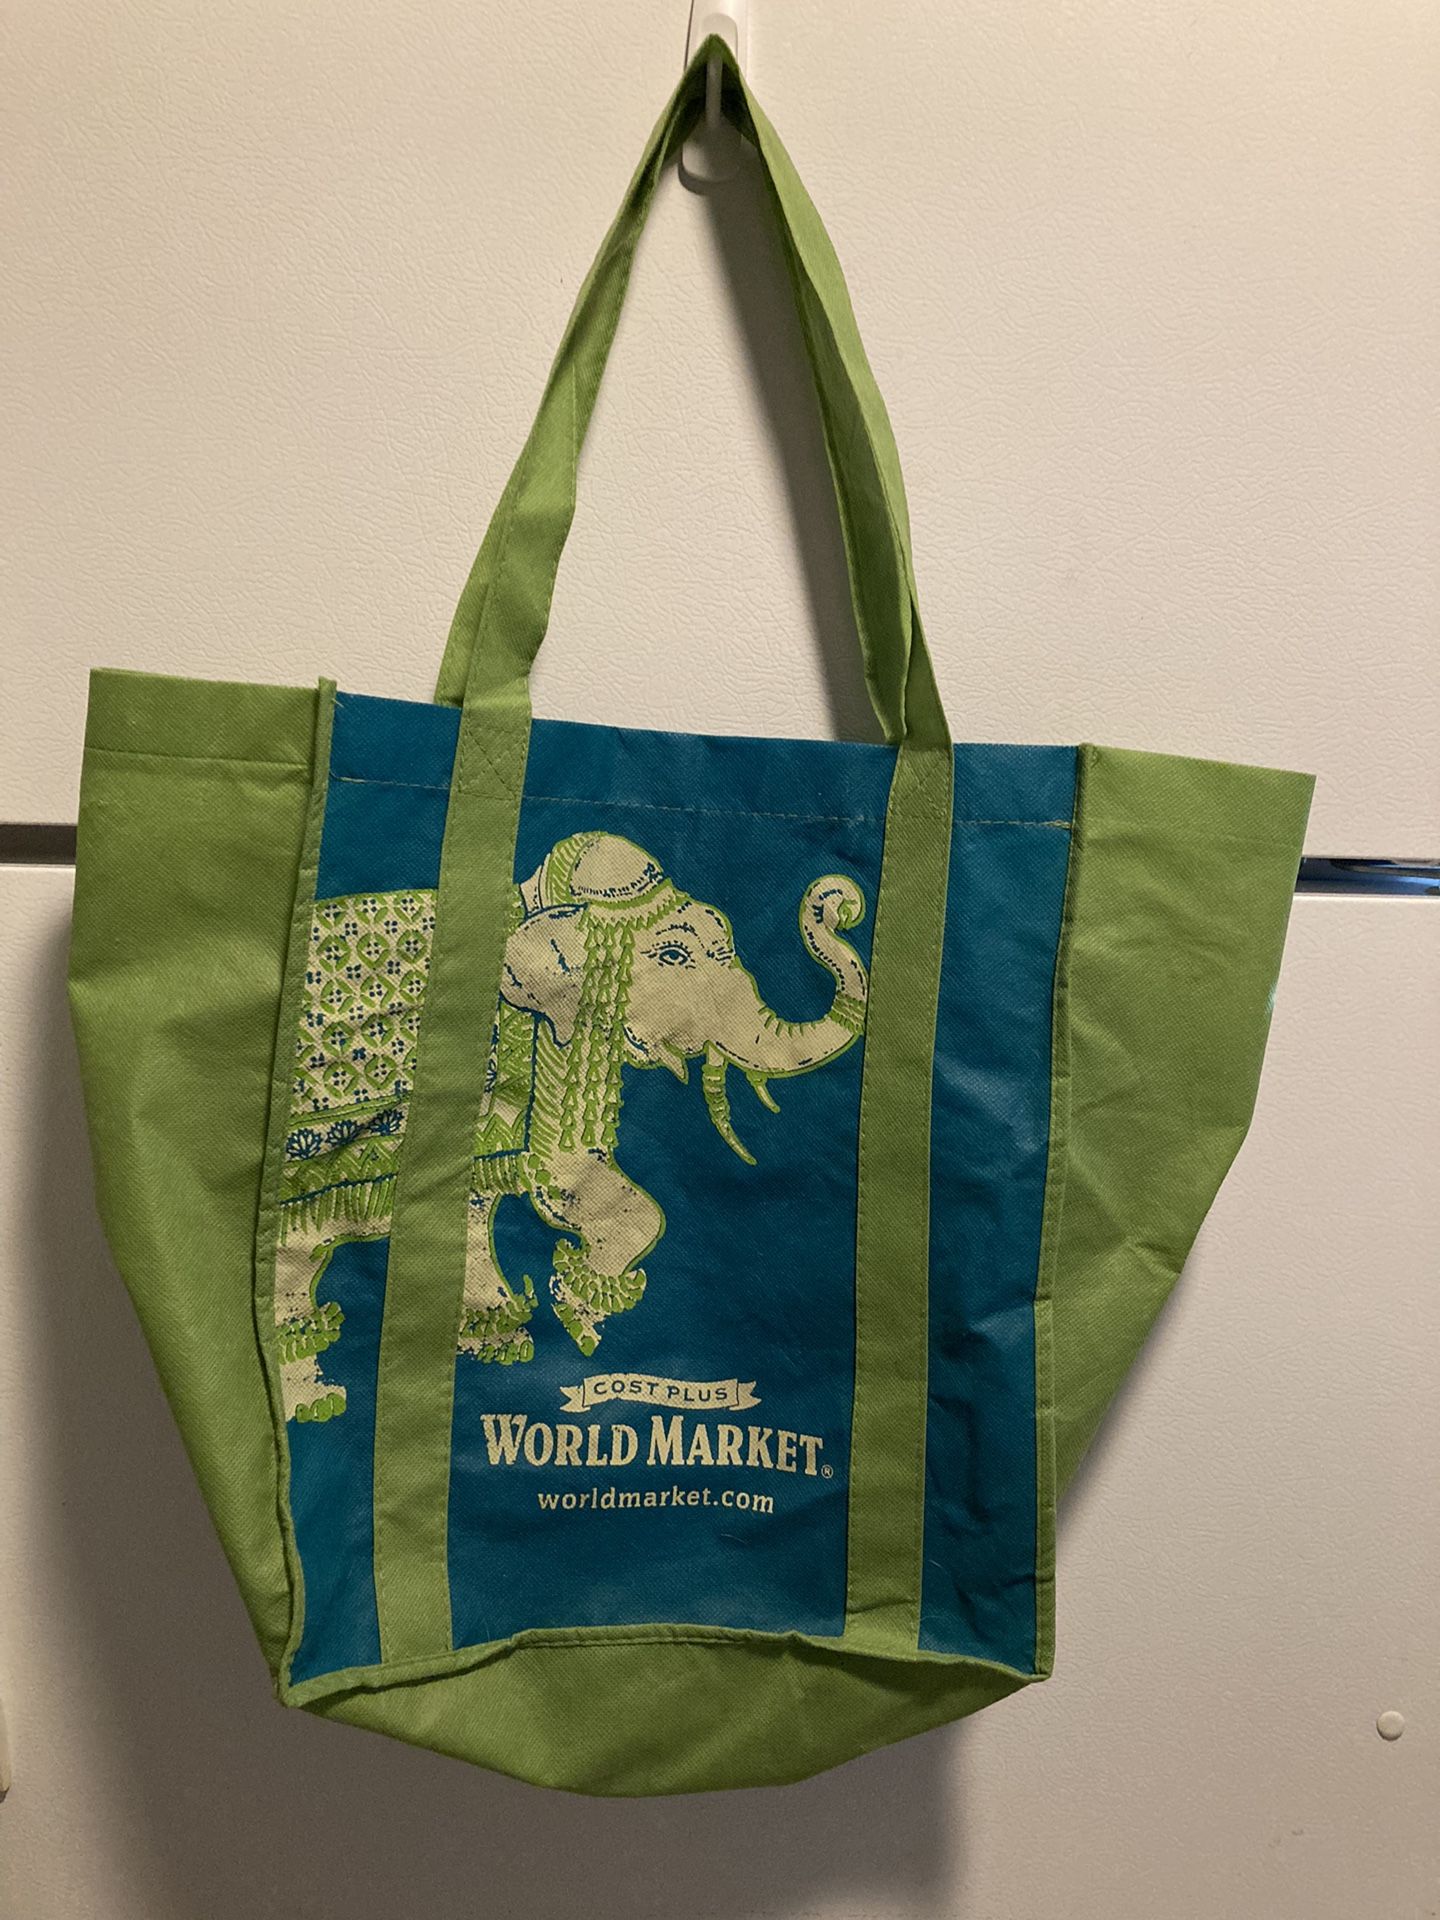 NEW/LIKE NEW MEDIUM/LARGE TOTE BAGS $3 EACH BRANDS INCLUDE WORLD MARKET, OLD NAVY, JUSTICE, VICTORIA'S SECRET. $3 EACH 